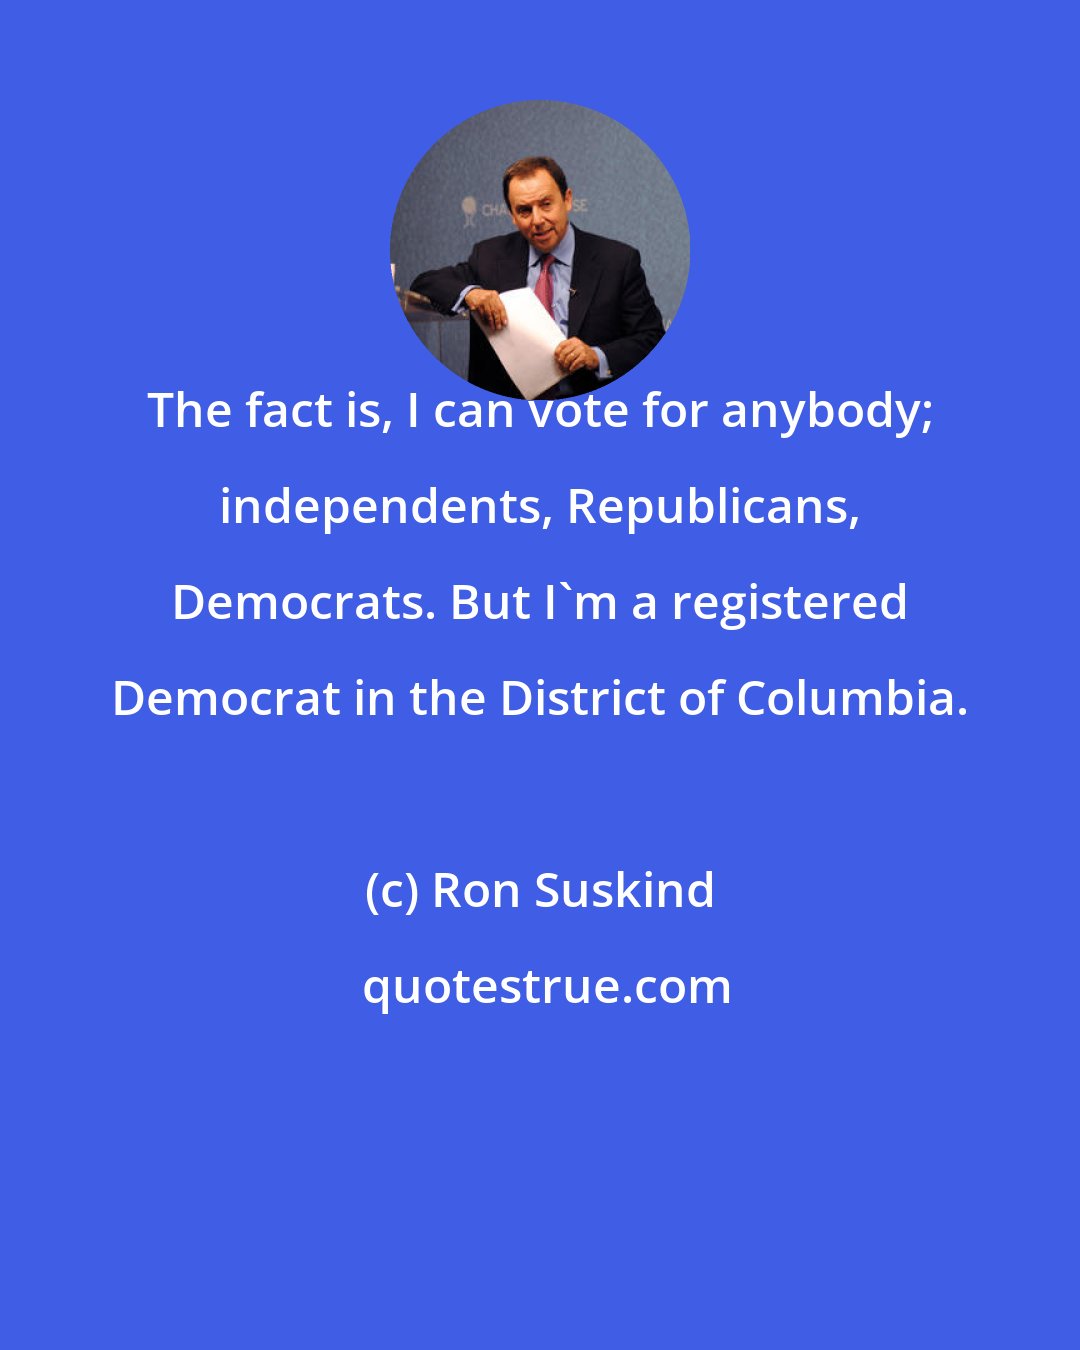 Ron Suskind: The fact is, I can vote for anybody; independents, Republicans, Democrats. But I'm a registered Democrat in the District of Columbia.